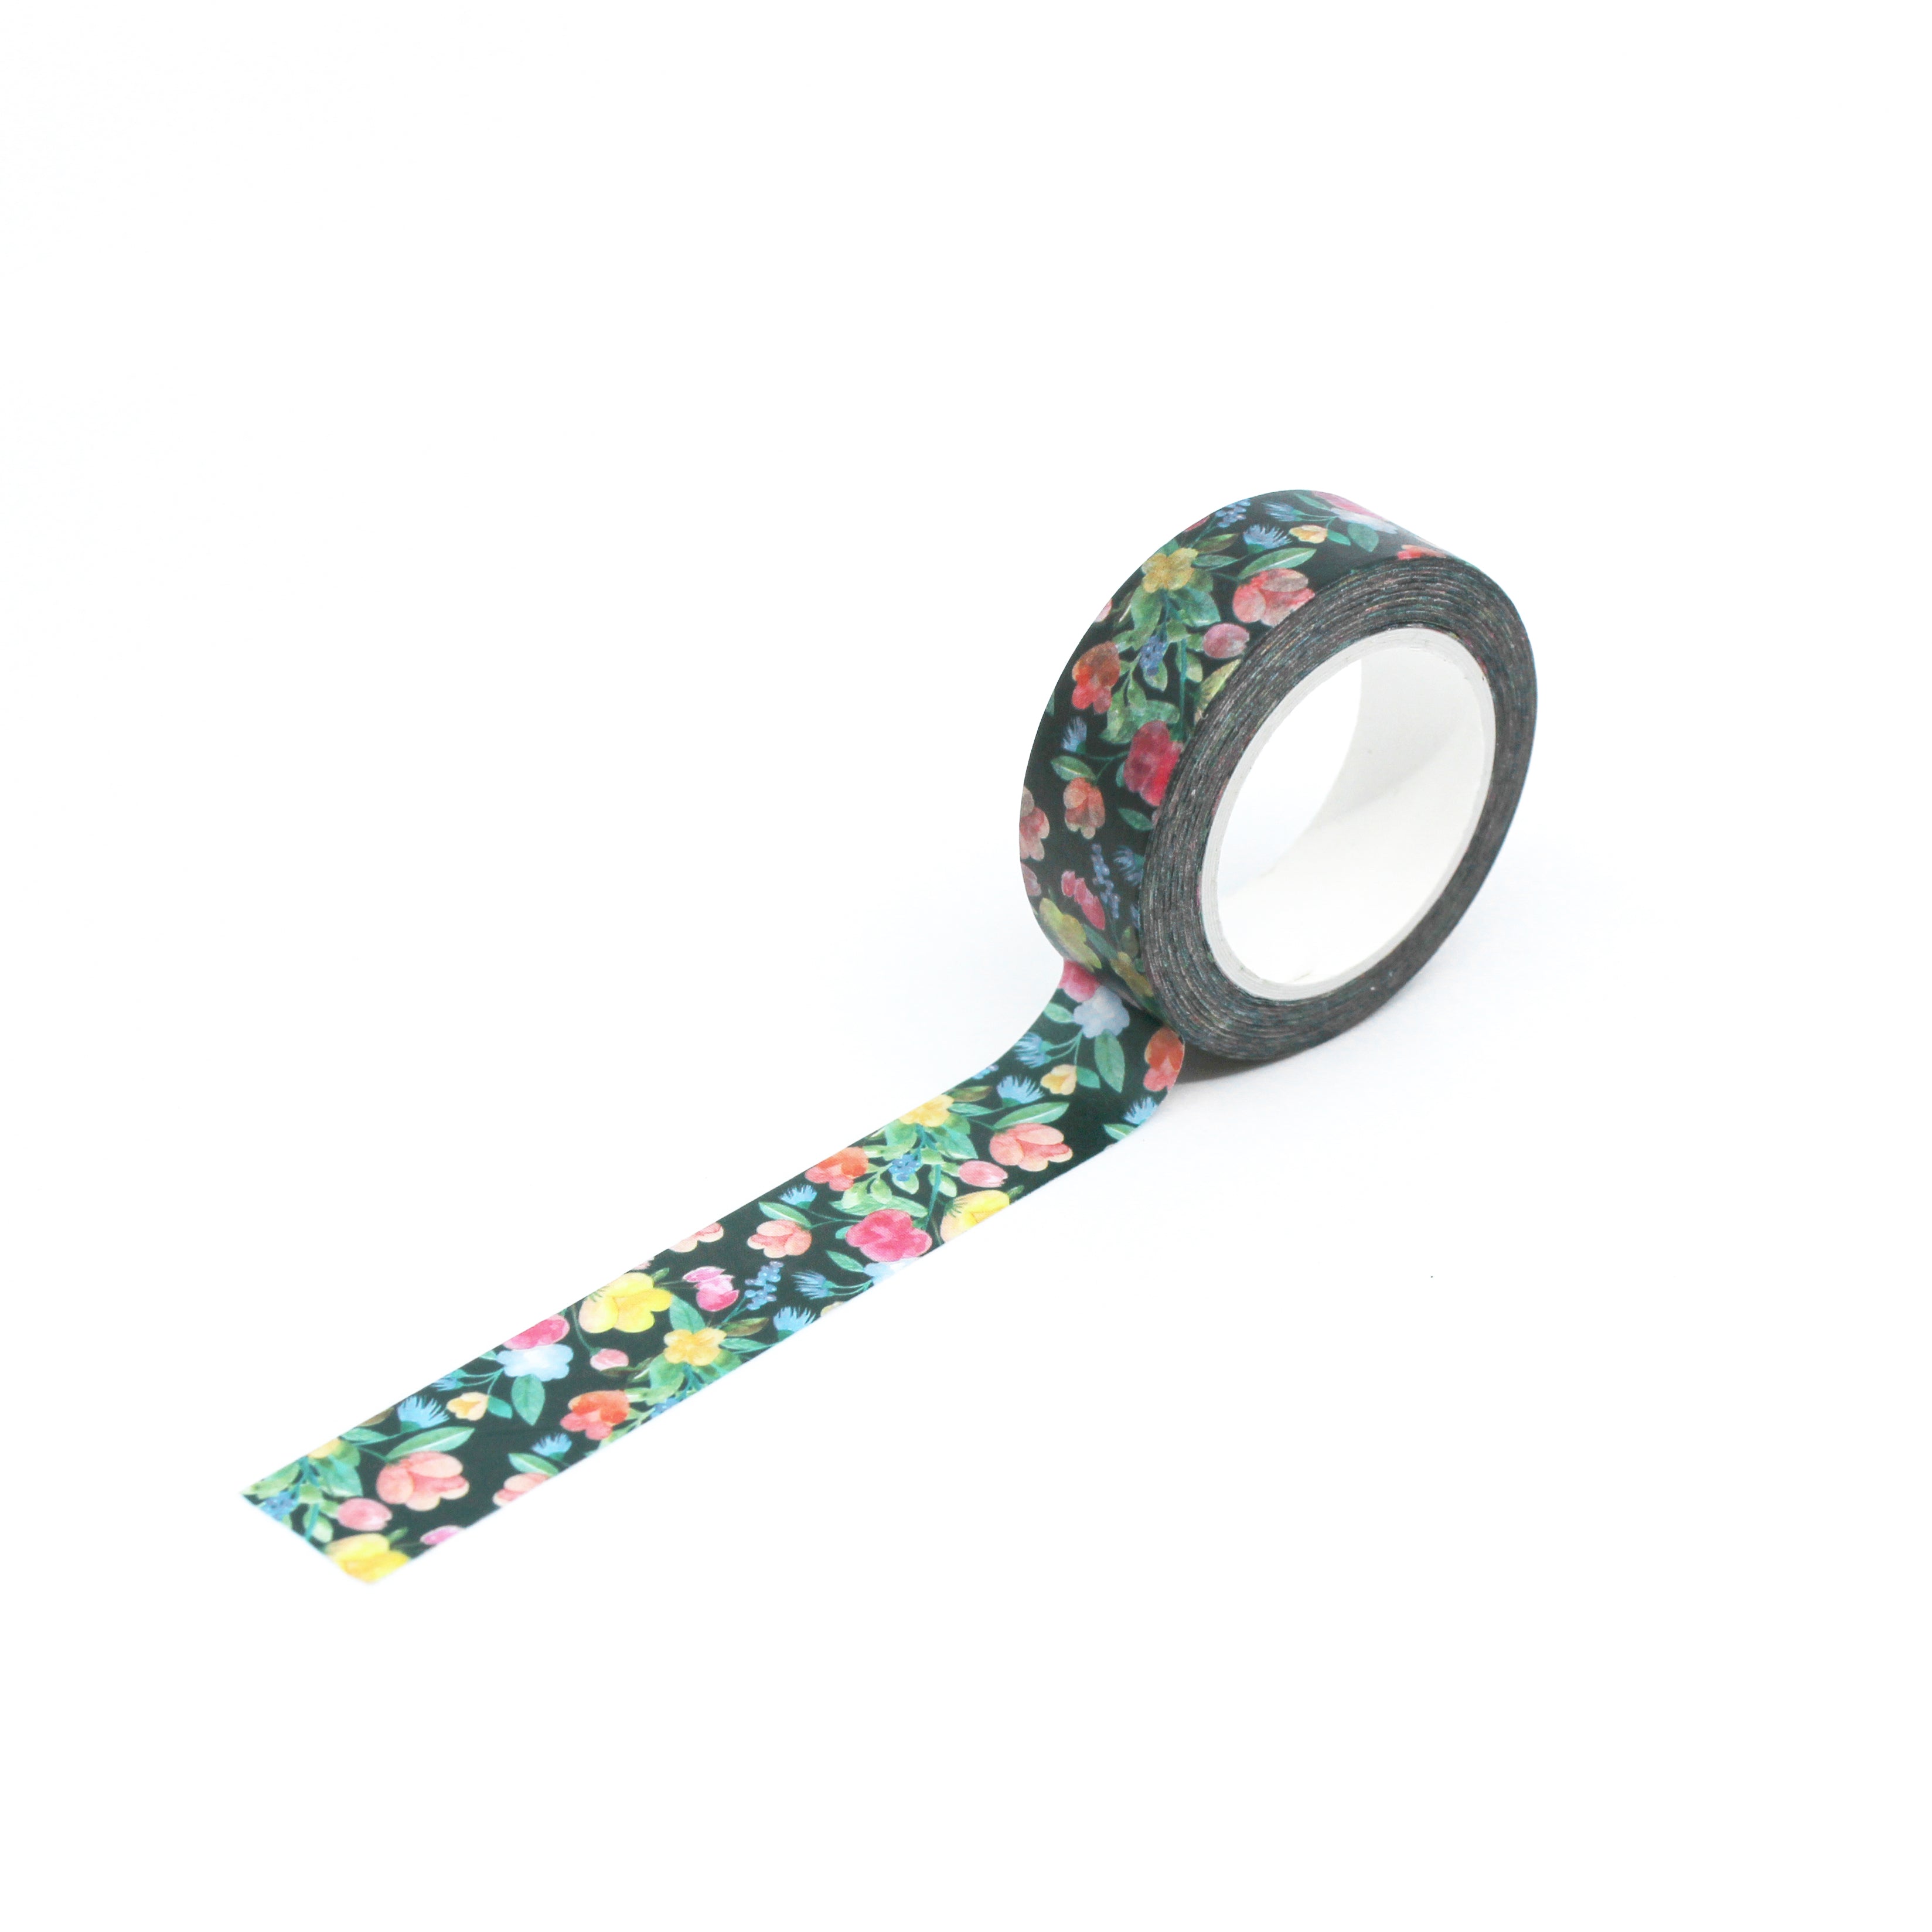 Enhance your crafts with our Bright Floral Black Background Washi Tape, adorned with vivid and striking floral patterns on a bold black background. Ideal for adding a dramatic and vibrant touch to your projects. This tape is sold at BBB Supplies Craft Shop.